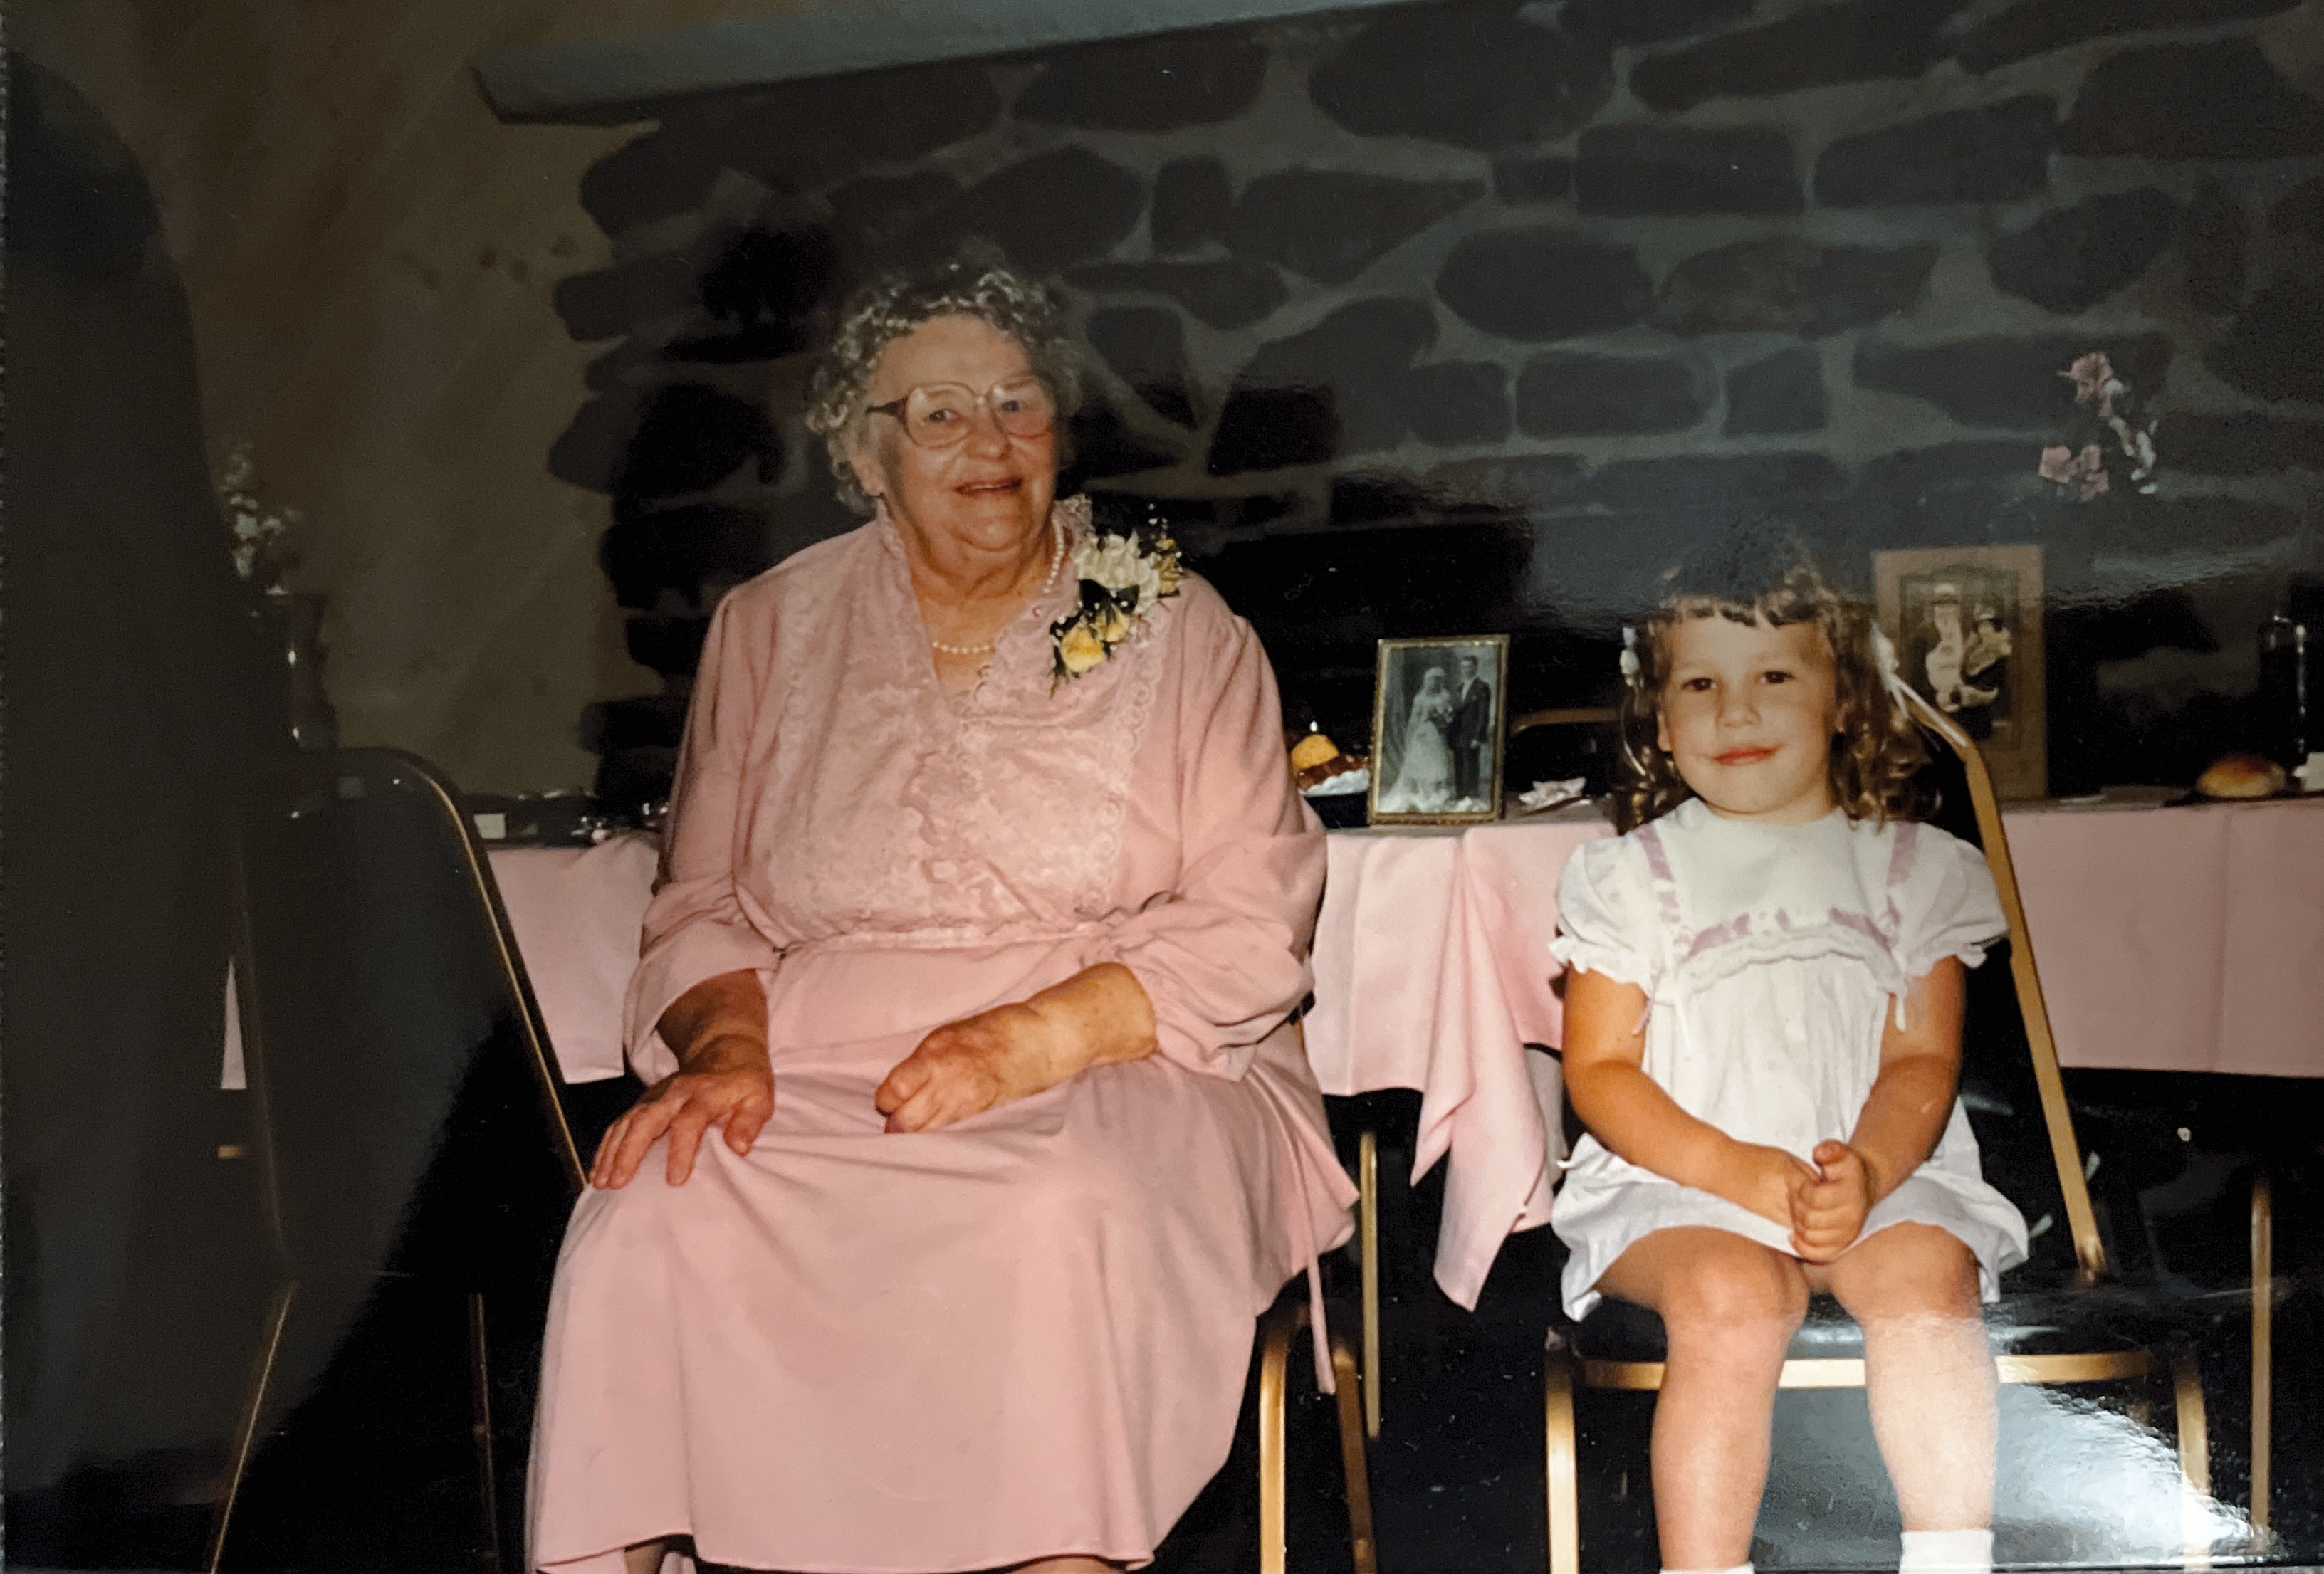 July 1986 Great Grandma’s 75th birthday with Amy